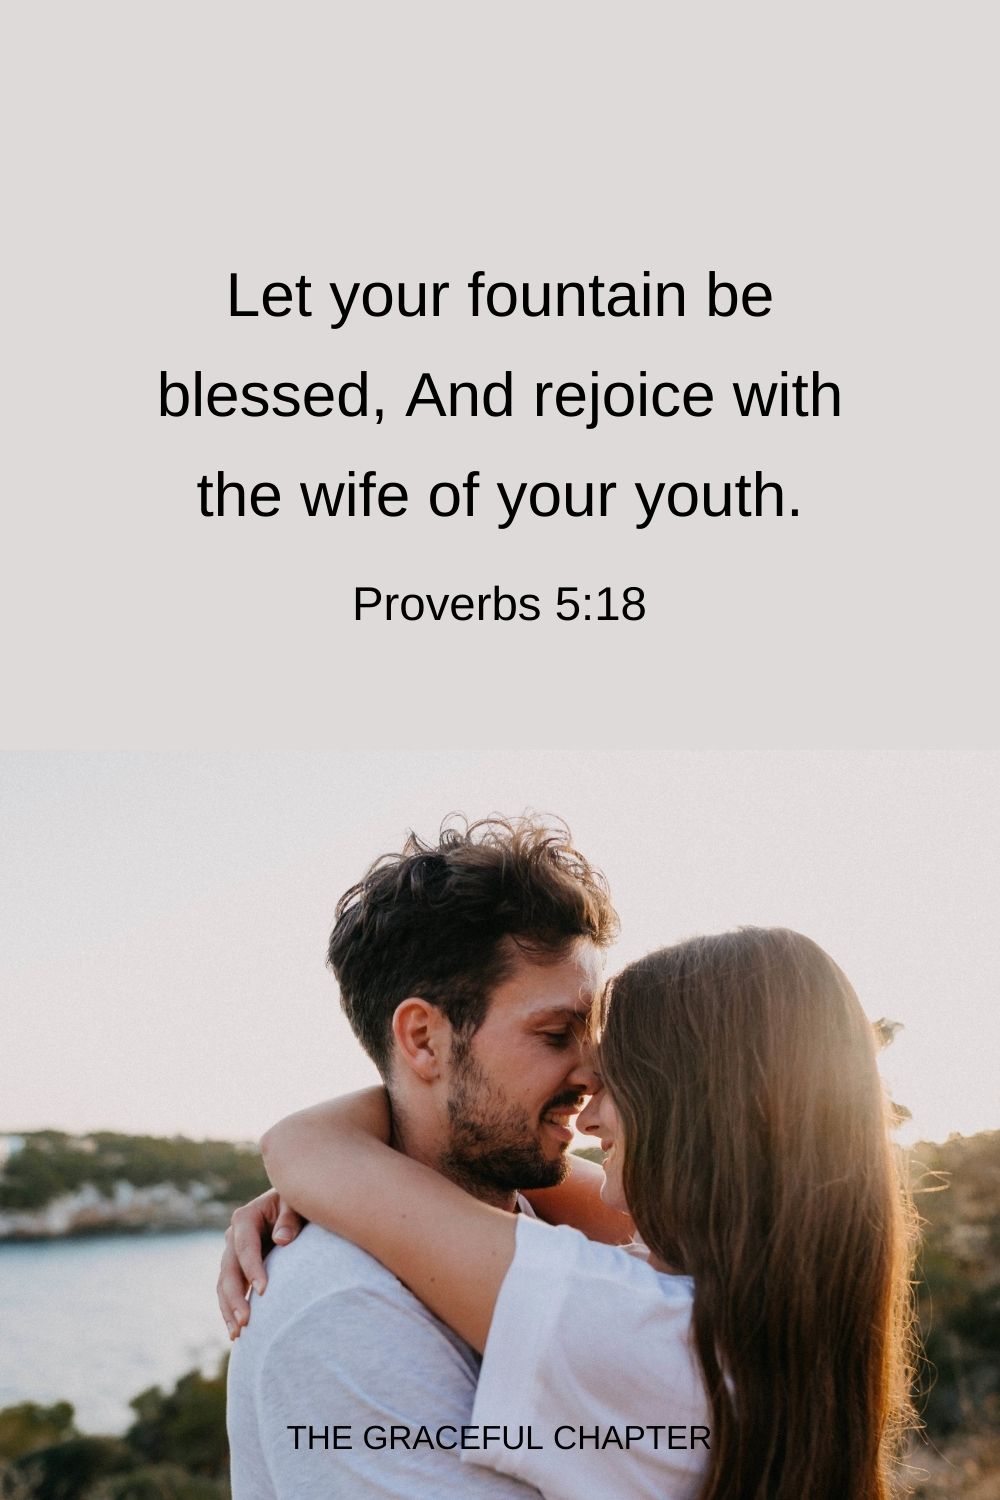 Let your fountain be blessed, And rejoice with the wife of your youth. Proverbs 5:18